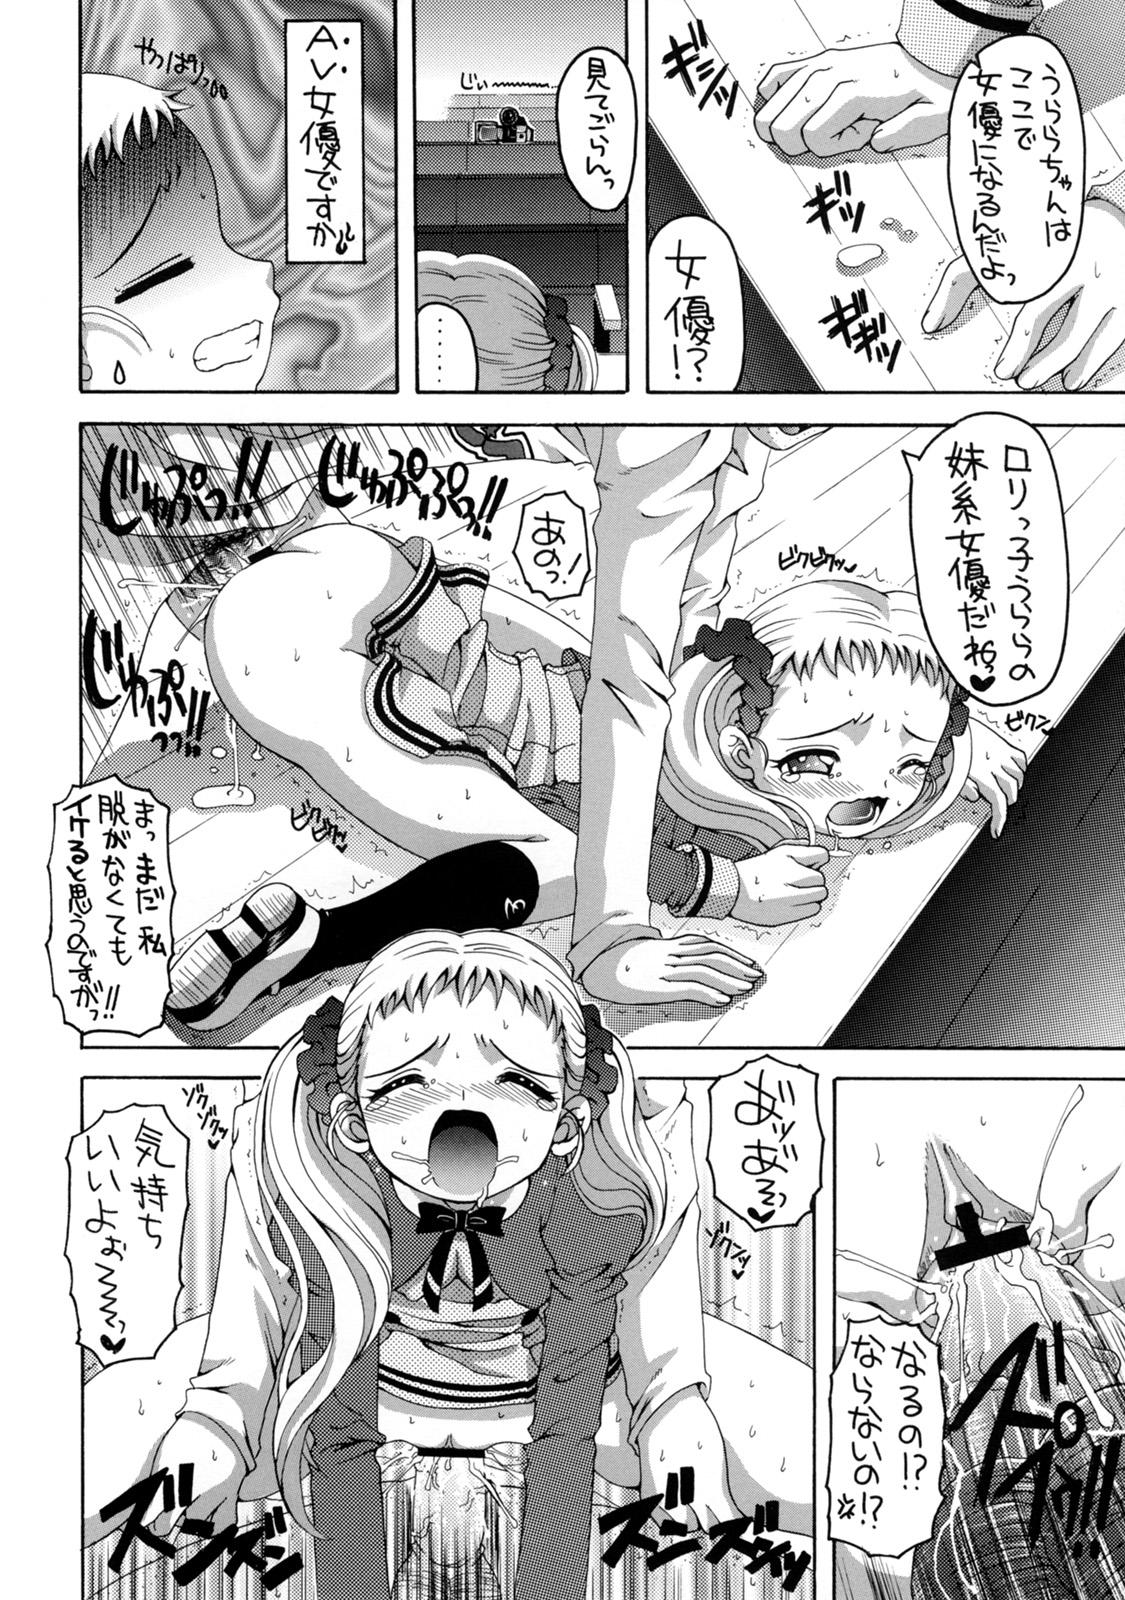 Dominate Yes! Five 3 - Pretty cure Yes precure 5 Gorgeous - Page 11